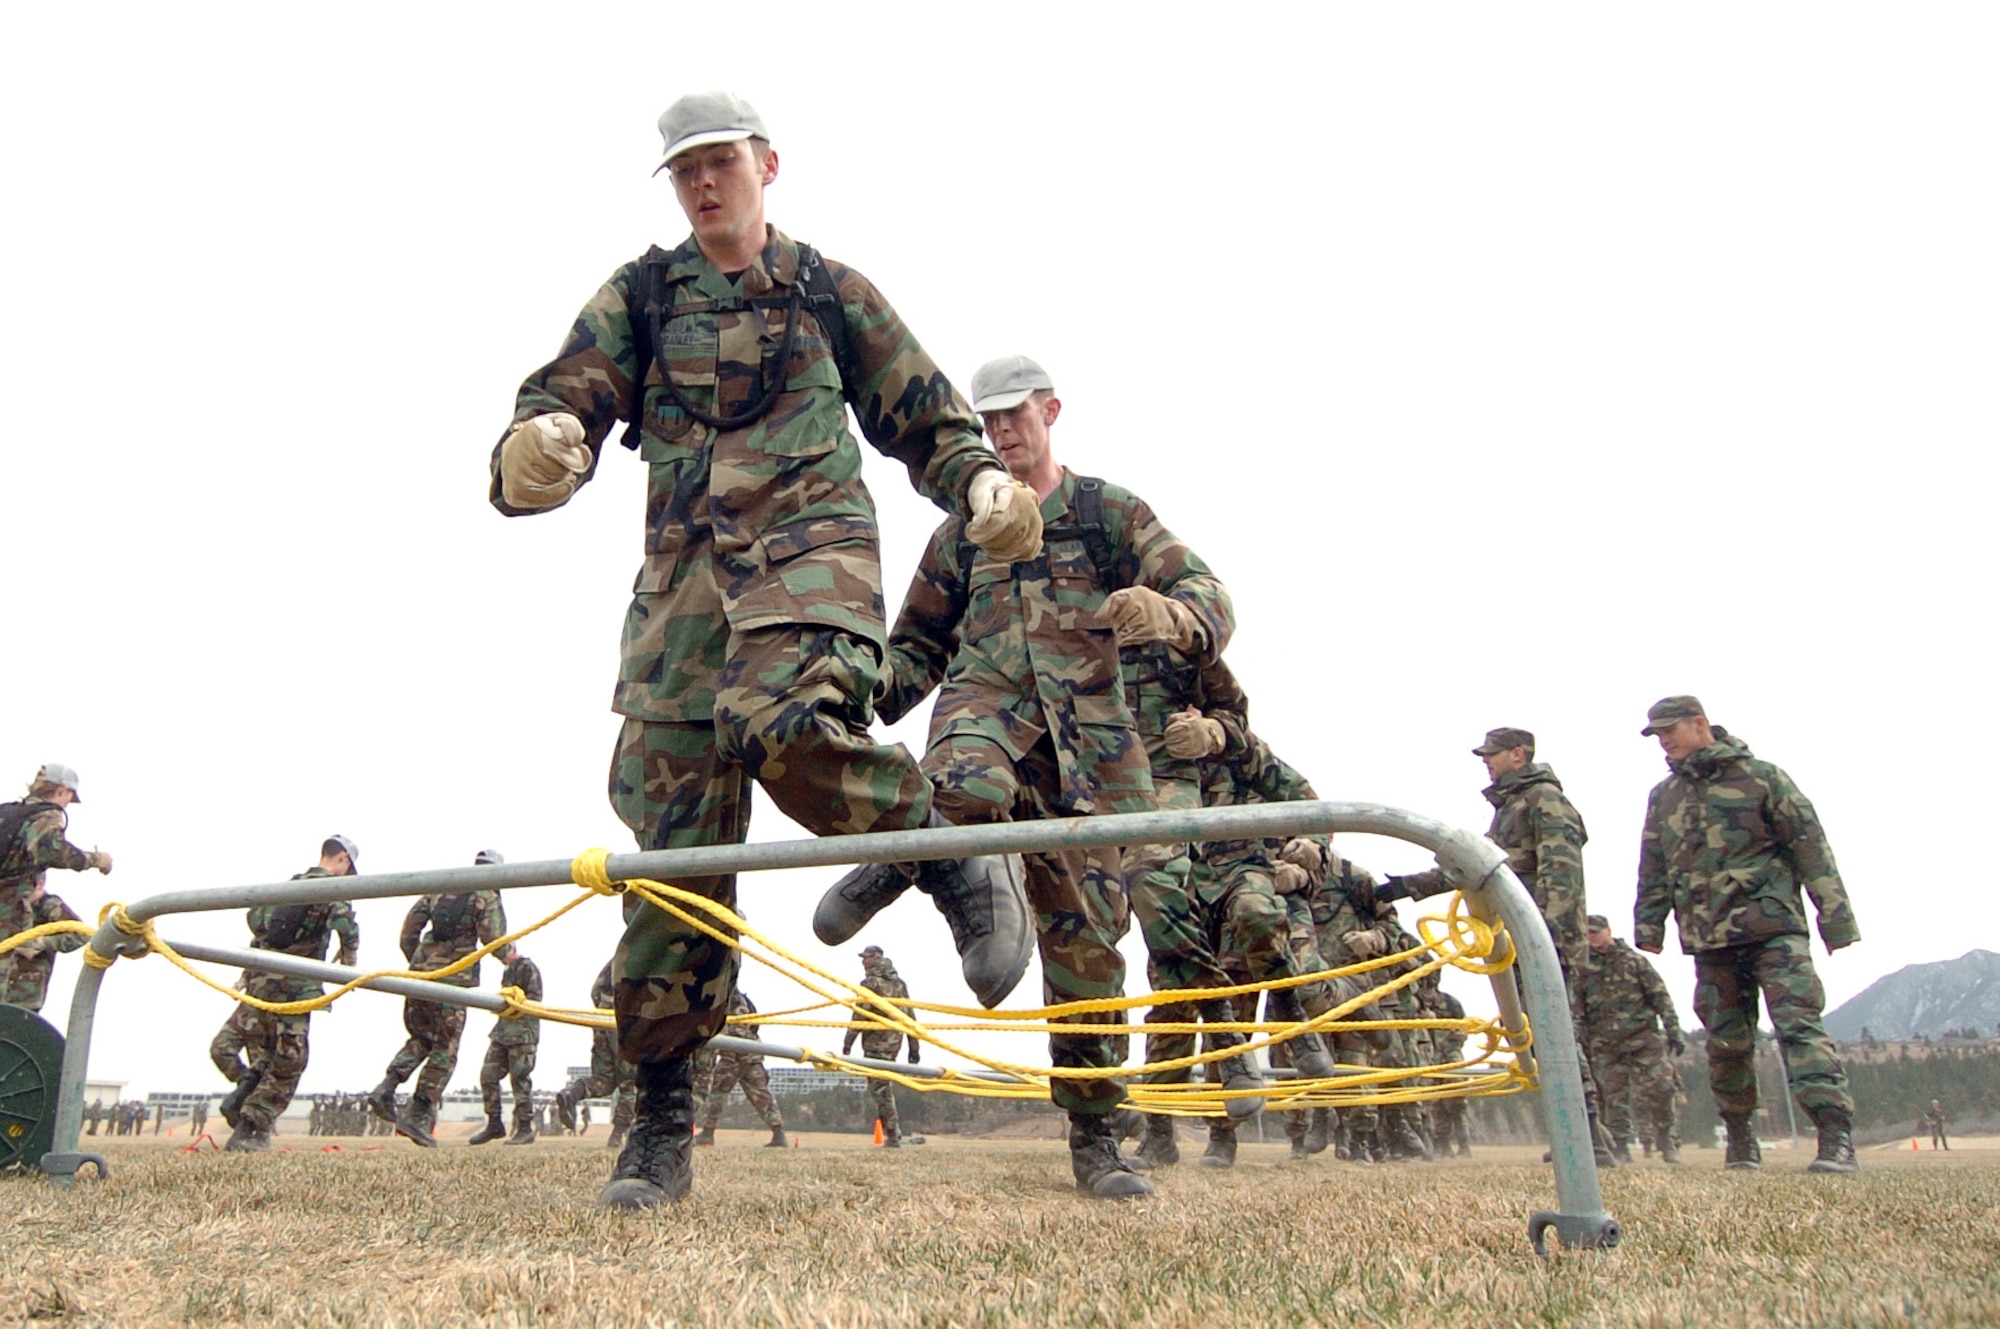 Cadet 4th Class Matthew Danley demonstrates some fancy footwork on the assault course during a training event at recognition Saturday, March 18, 2006, at the U.S. Air Force Academy, Colo. (U.S. Air Force photo/Charley Starr)


